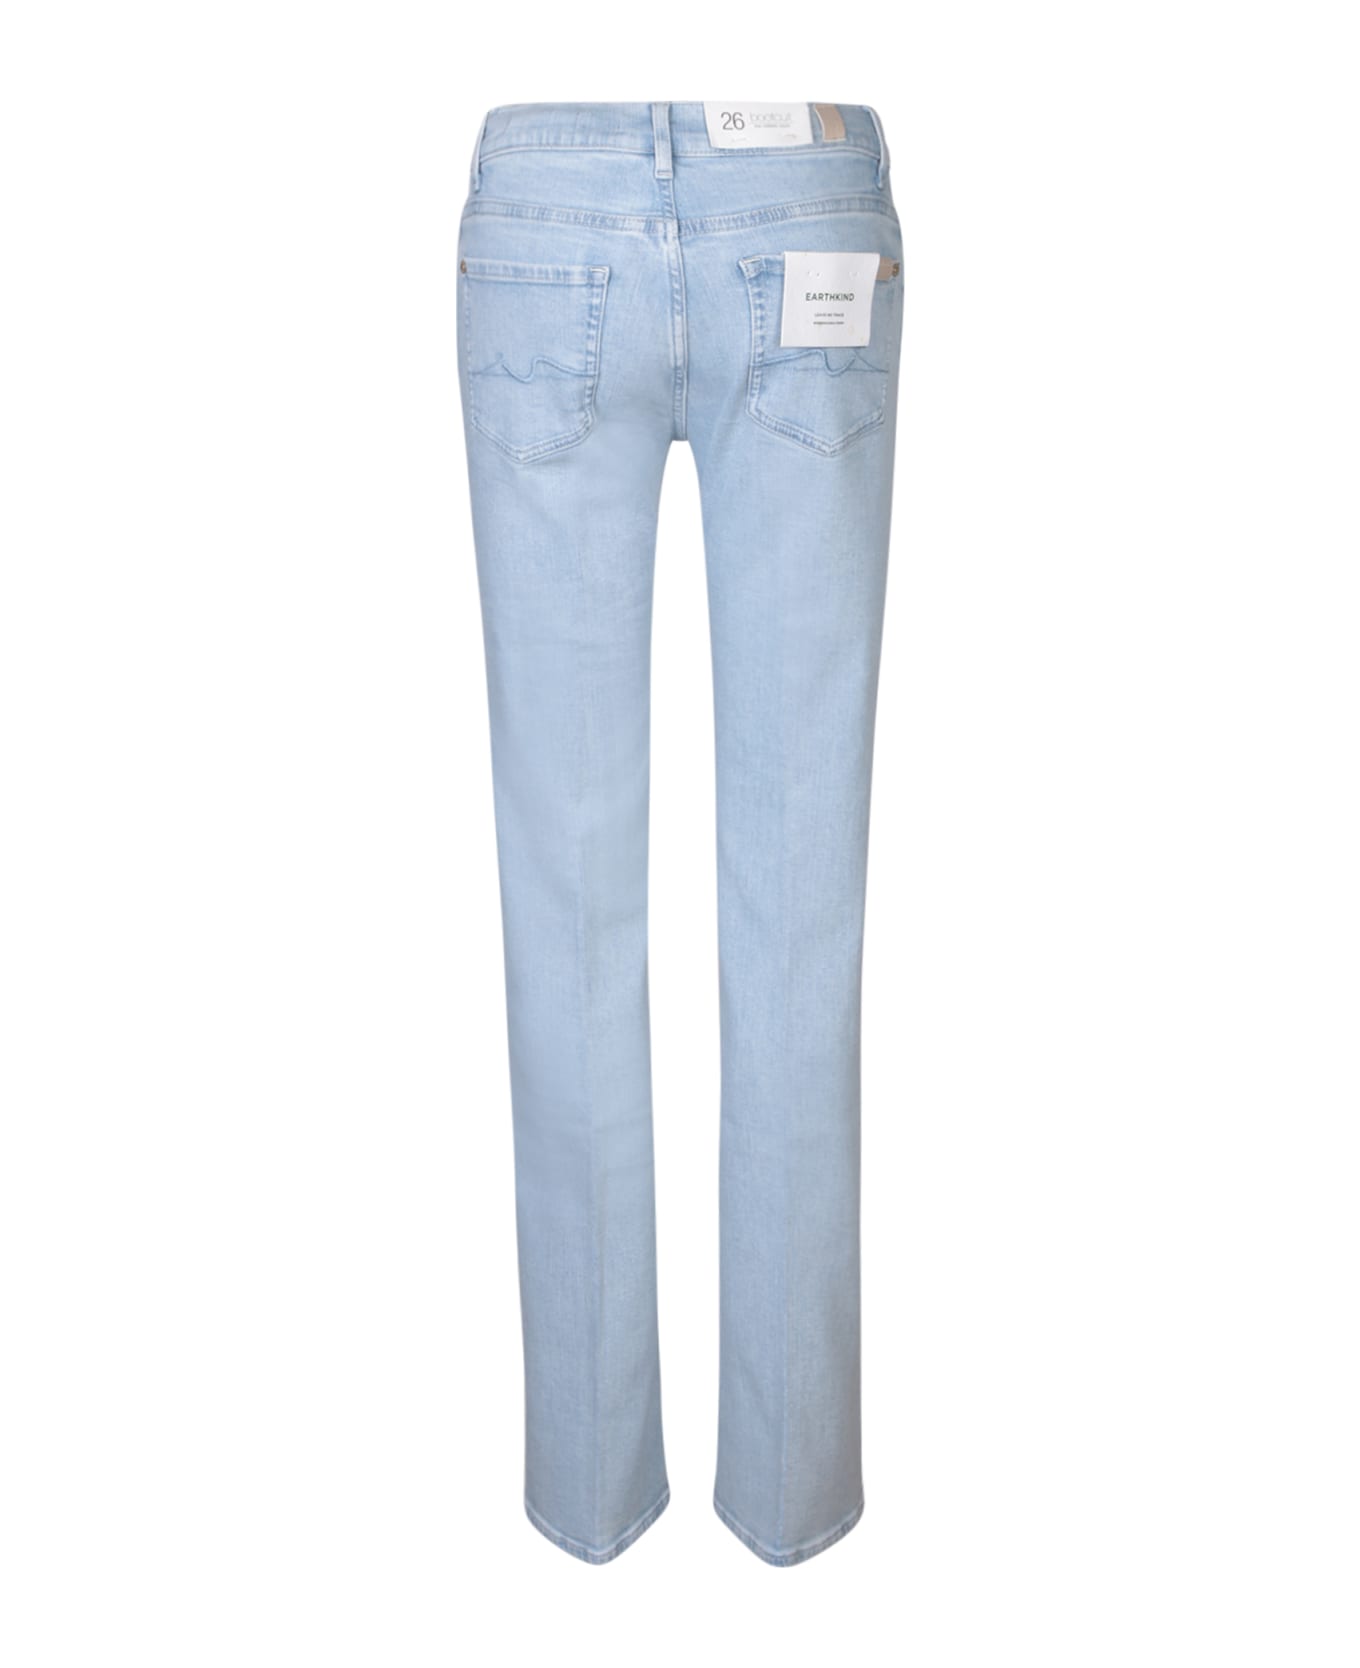 7 For All Mankind Bootcut Light Blue Jeans - Blue